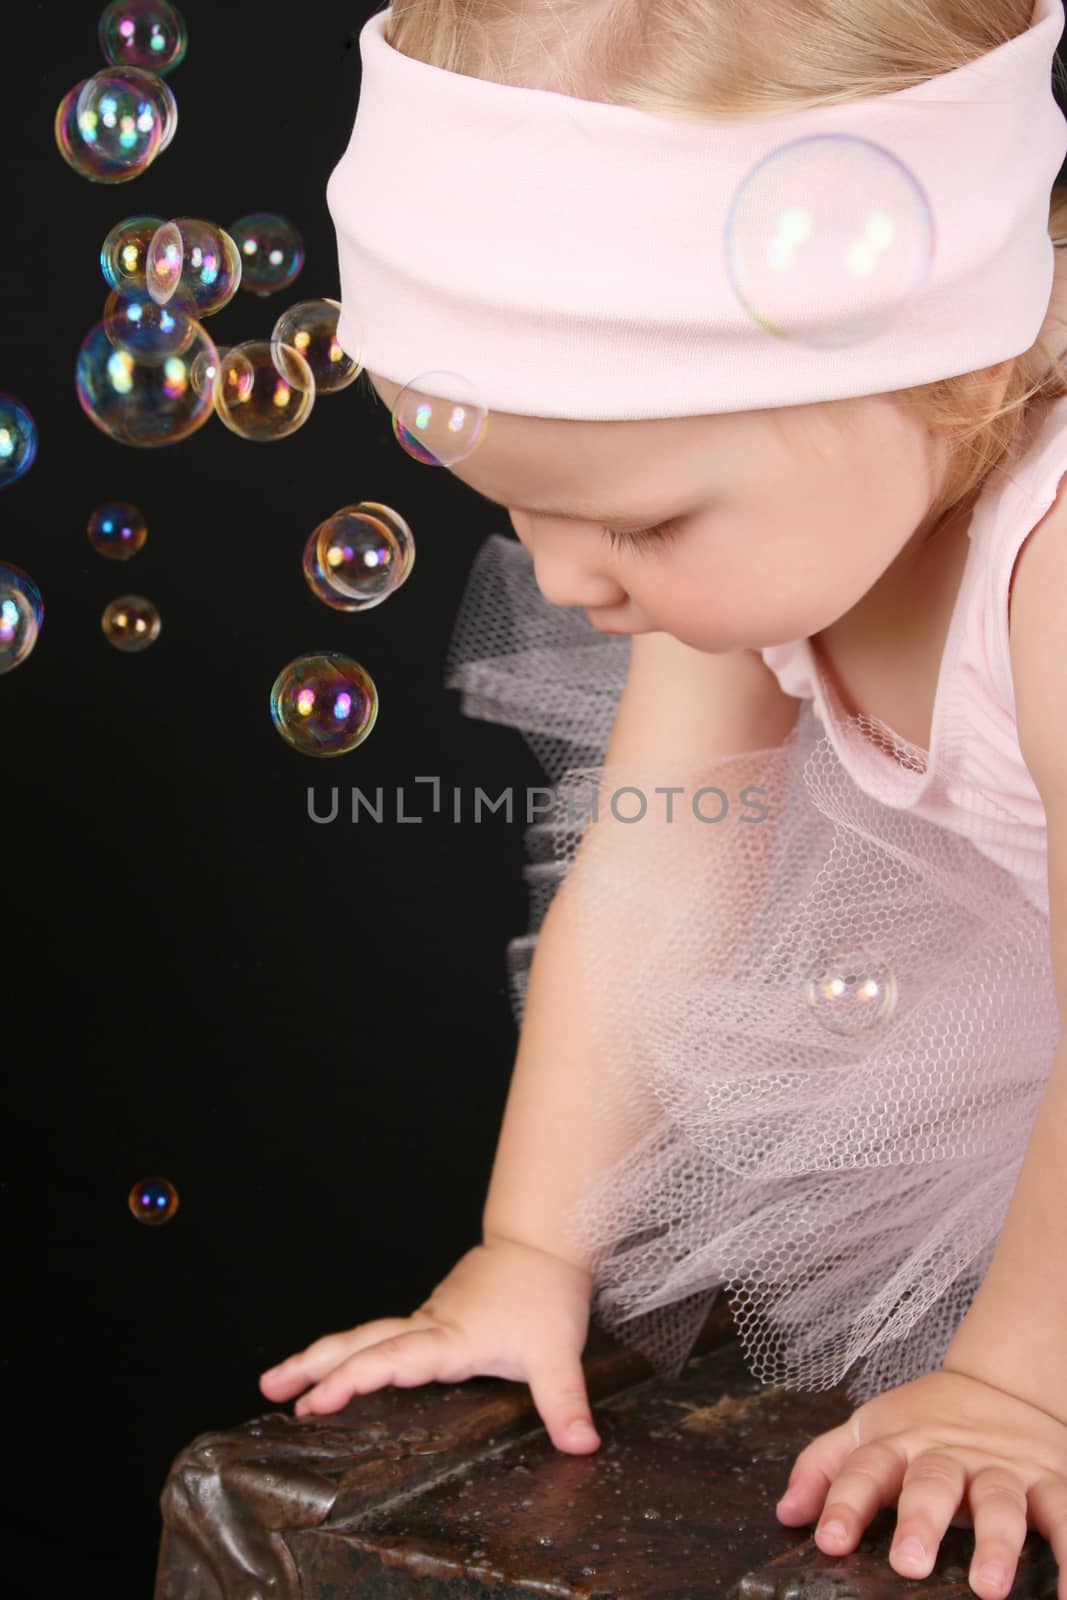 Ballet bubbles by vanell